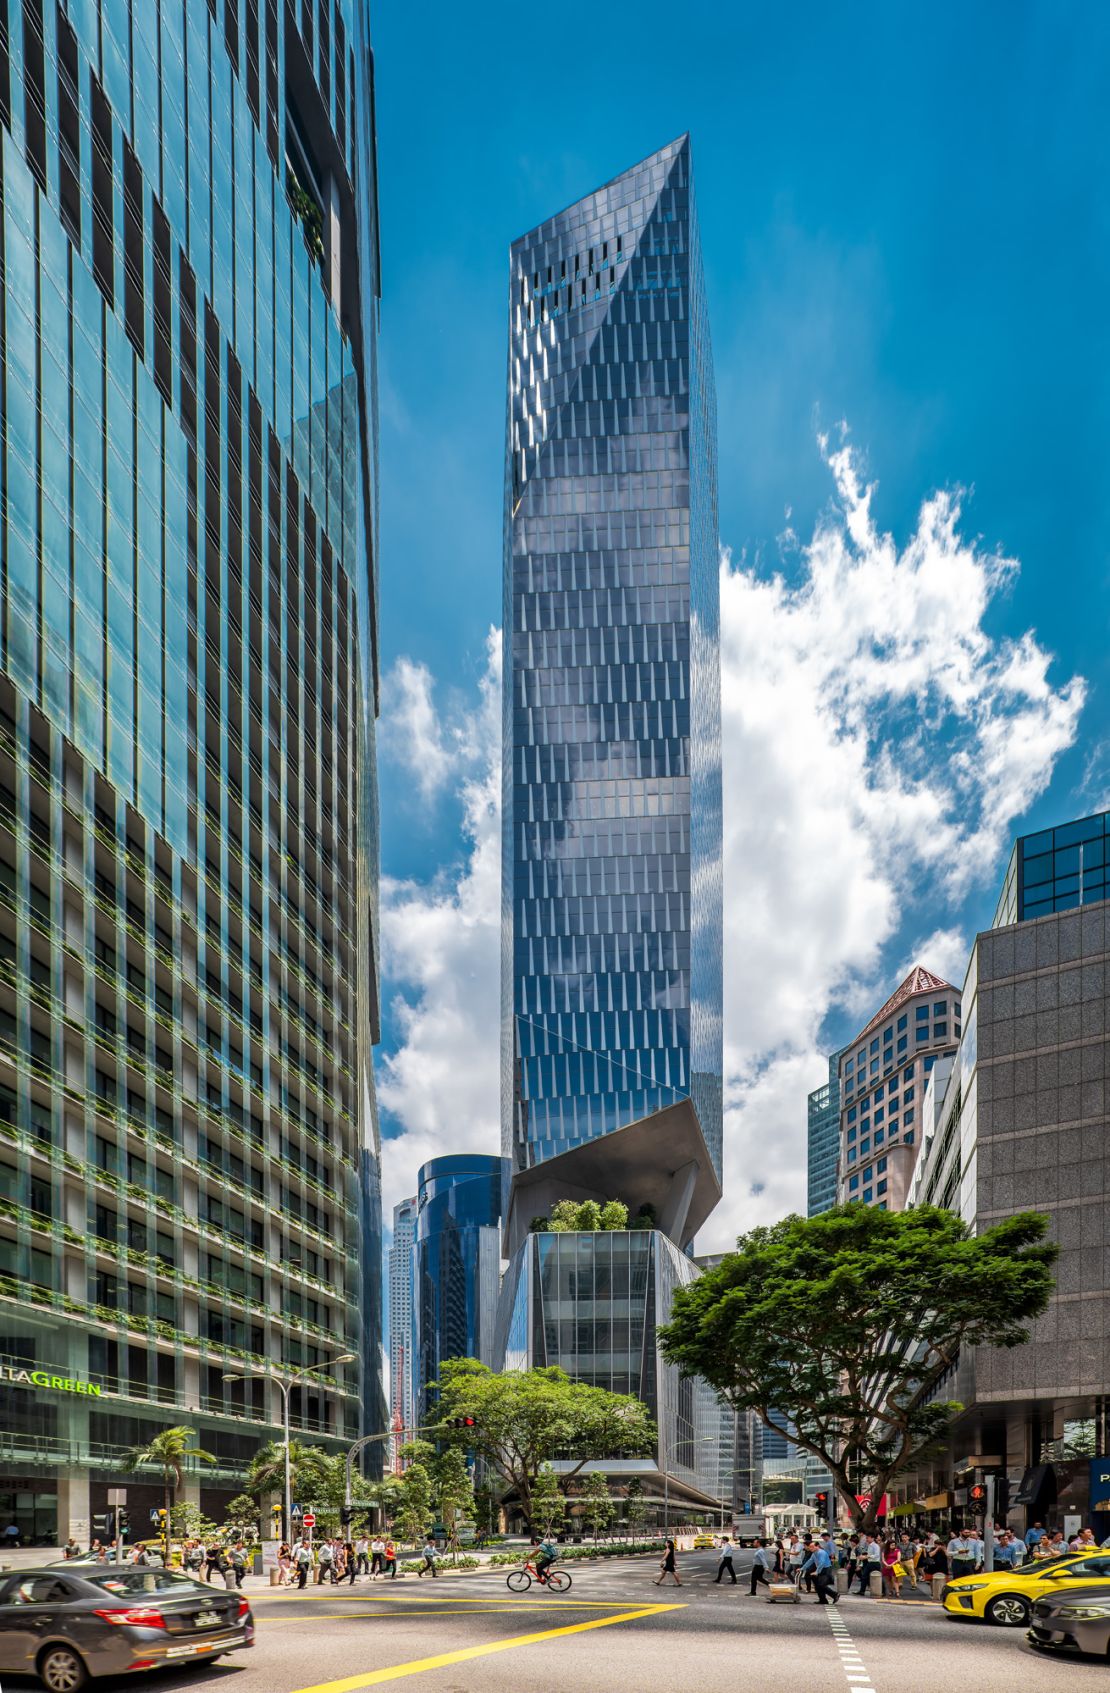 The tower is located in Singapore's Central Business District. 